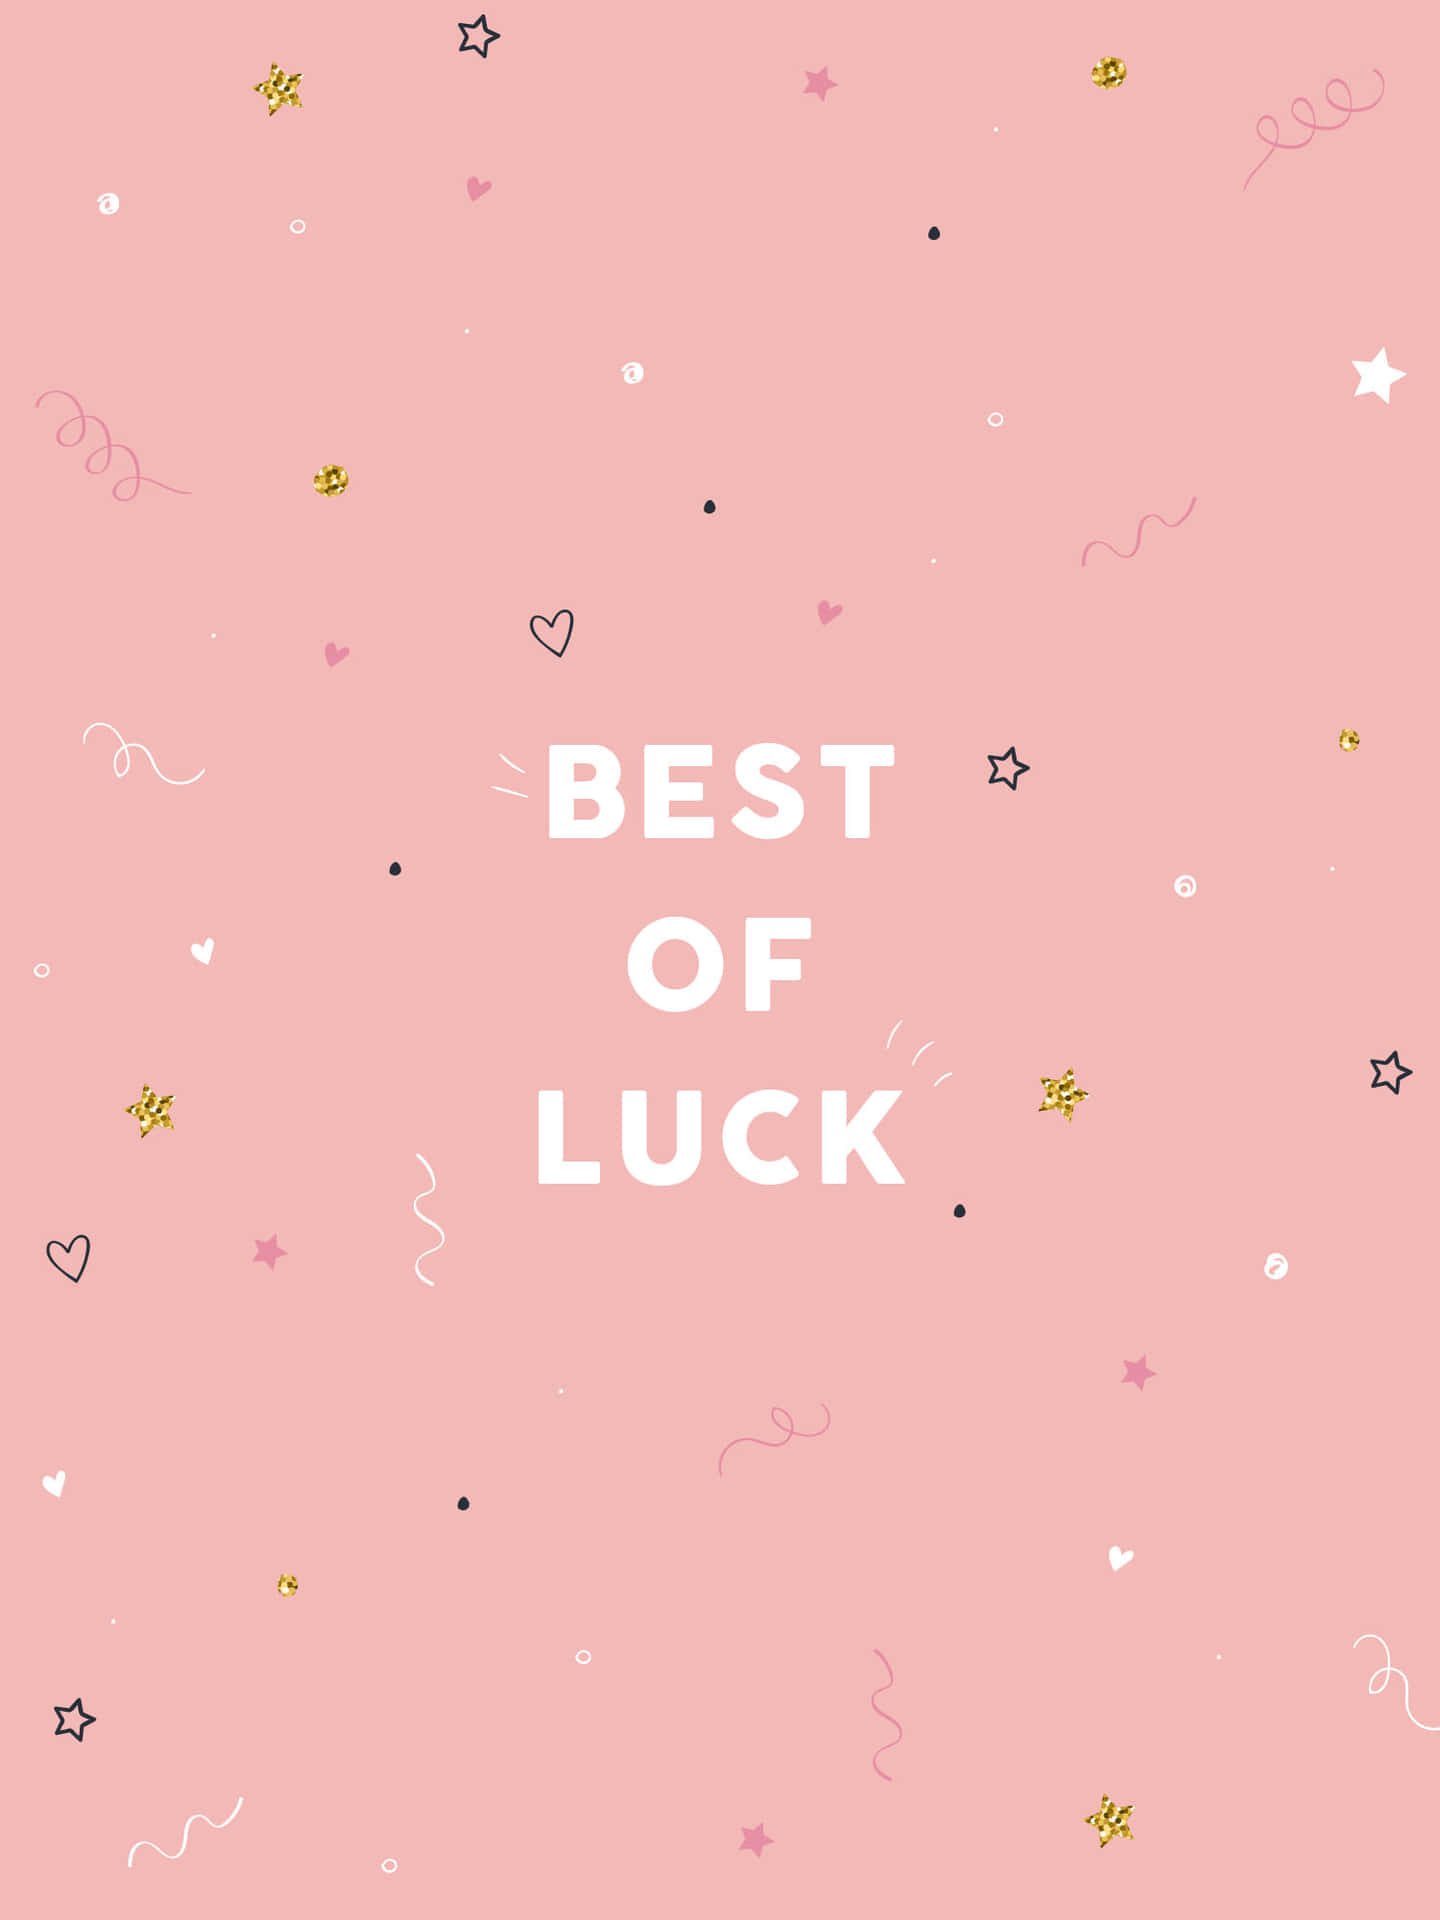 Wishing You All the Best of Luck!